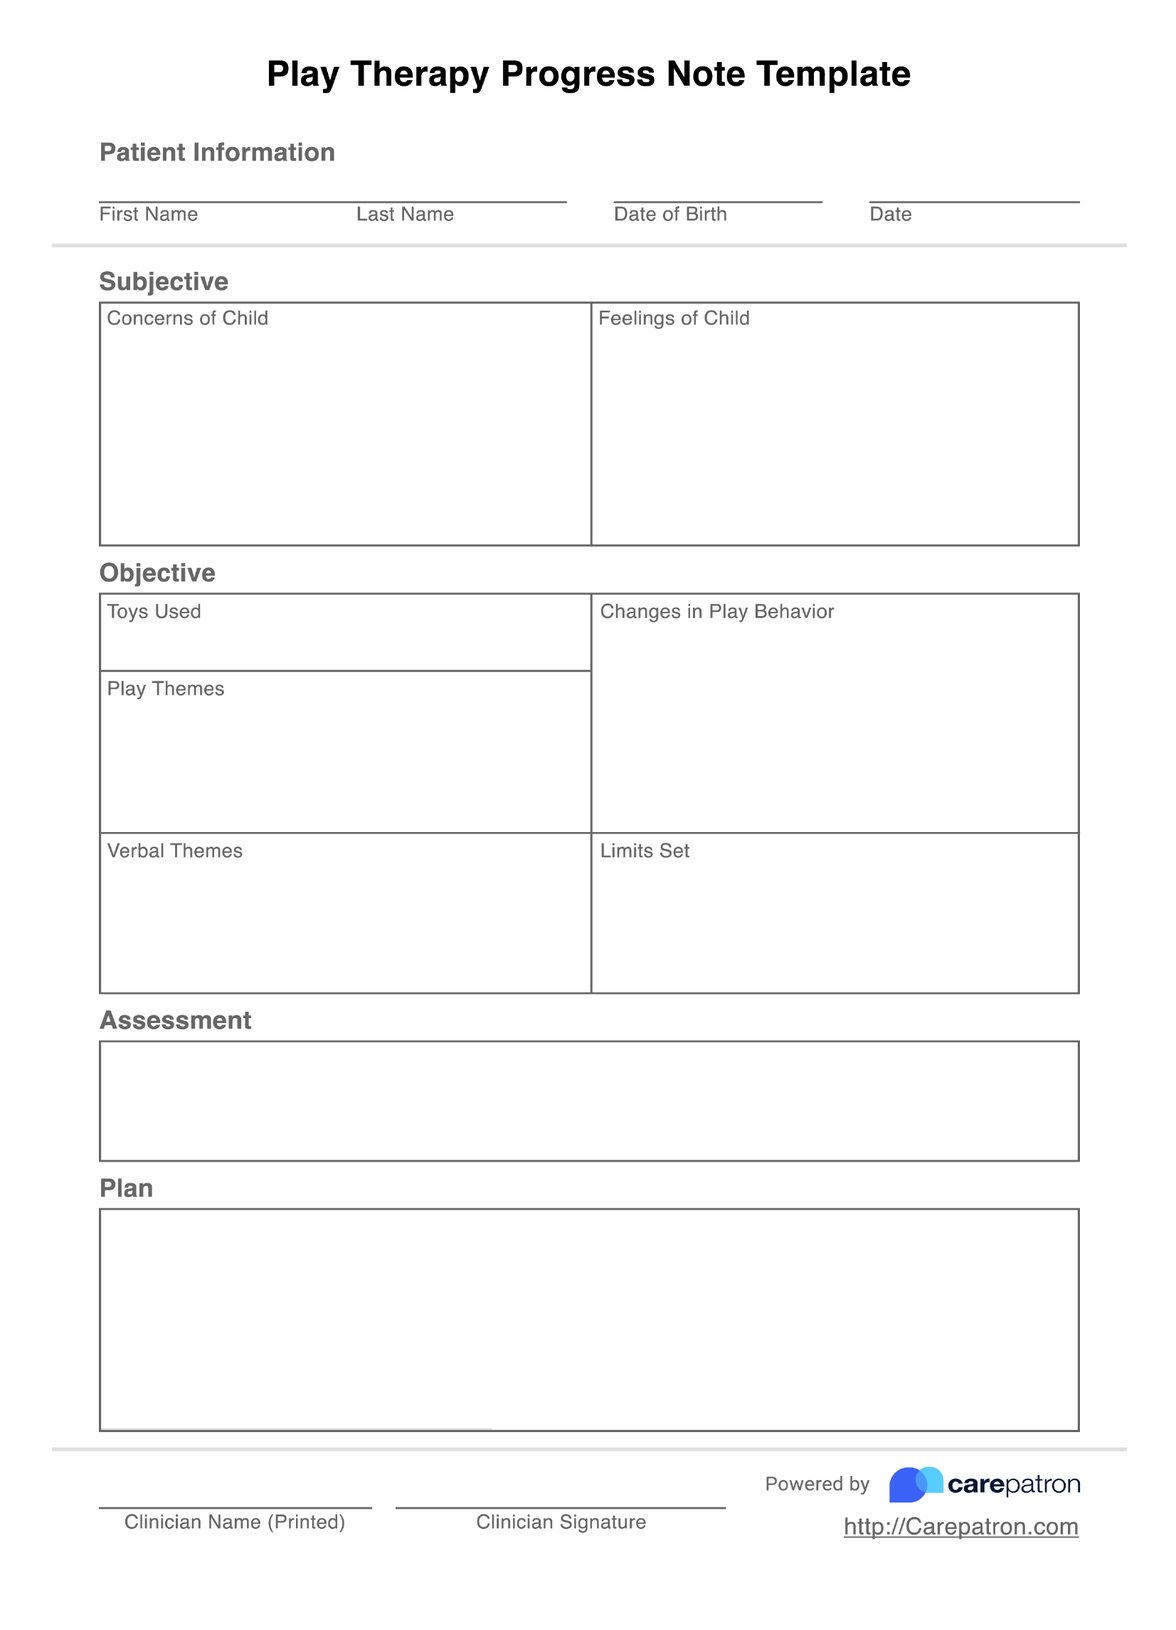 Play Therapy Progress Notes Template PDF Example